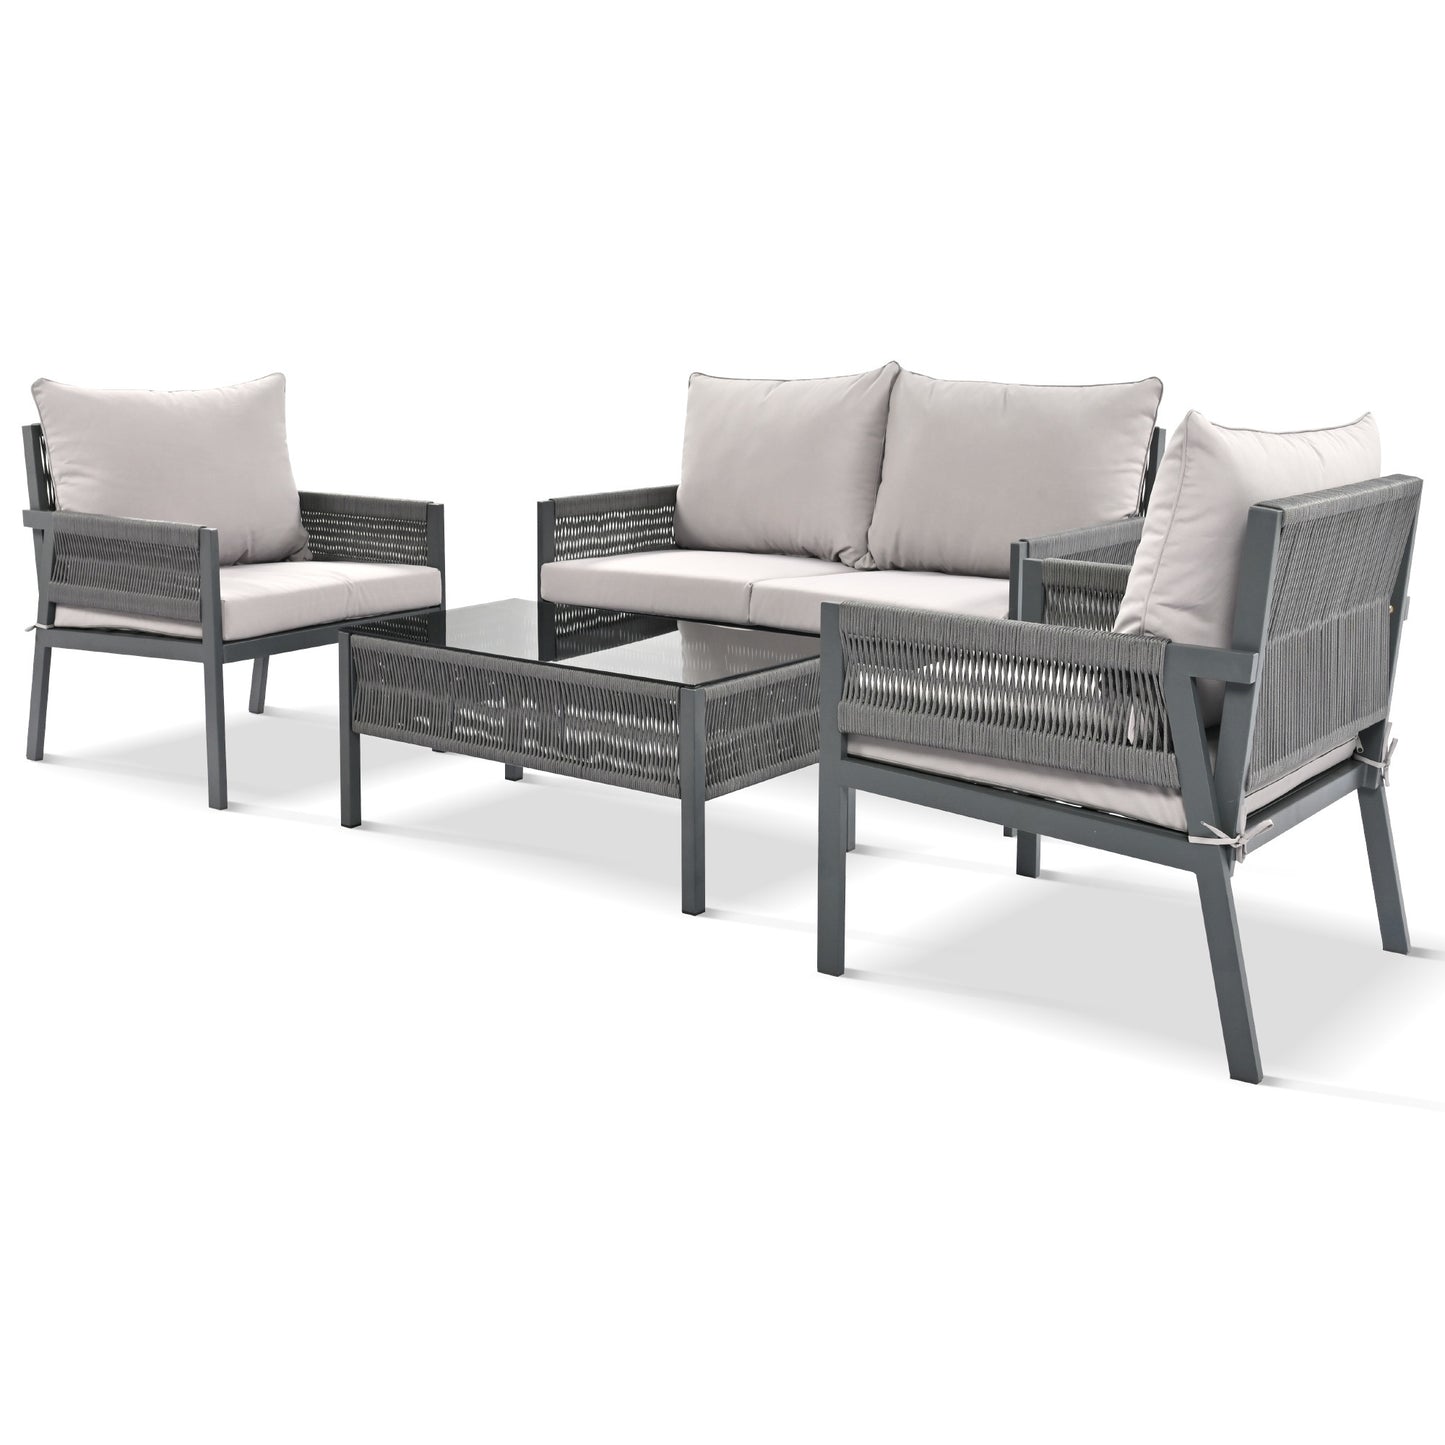 4-Piece Rope Patio Furniture Set with Thick Cushions